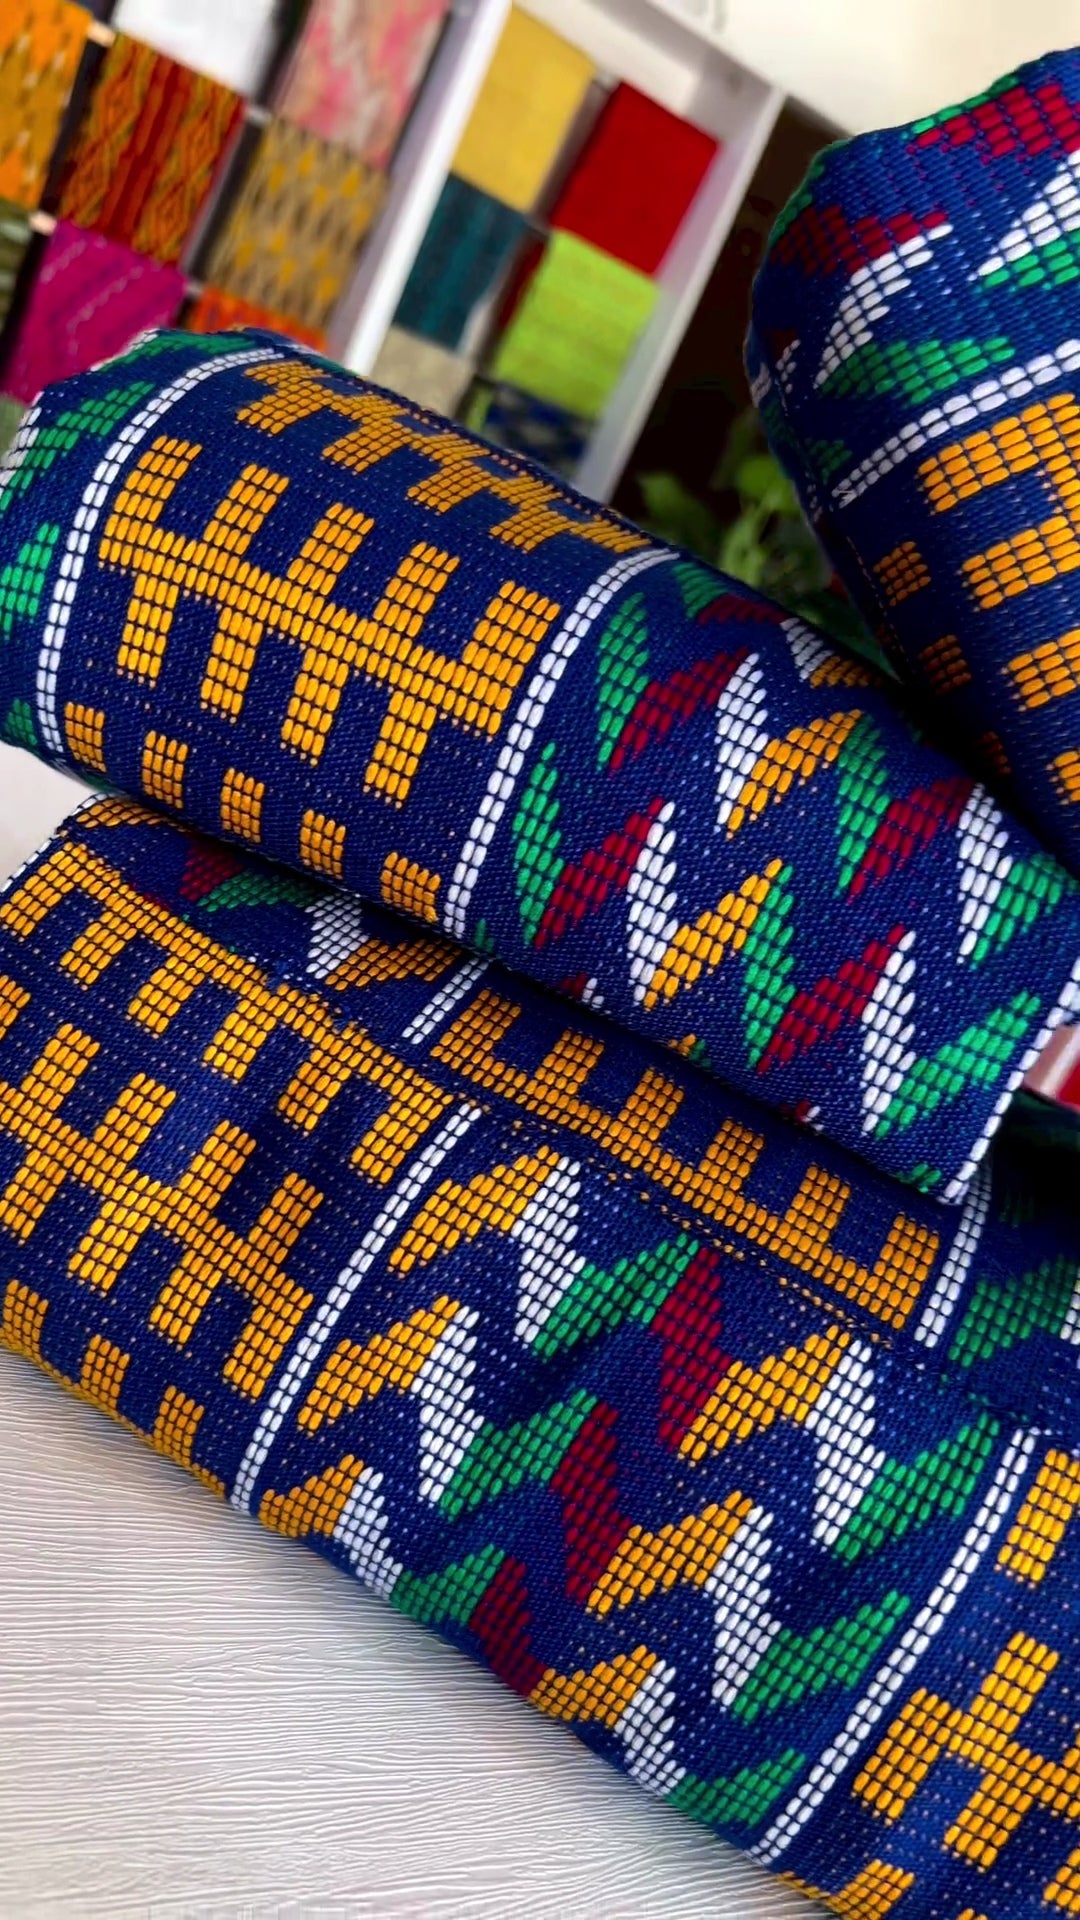 Authentic Hand Weaved Kente Cloth A2648